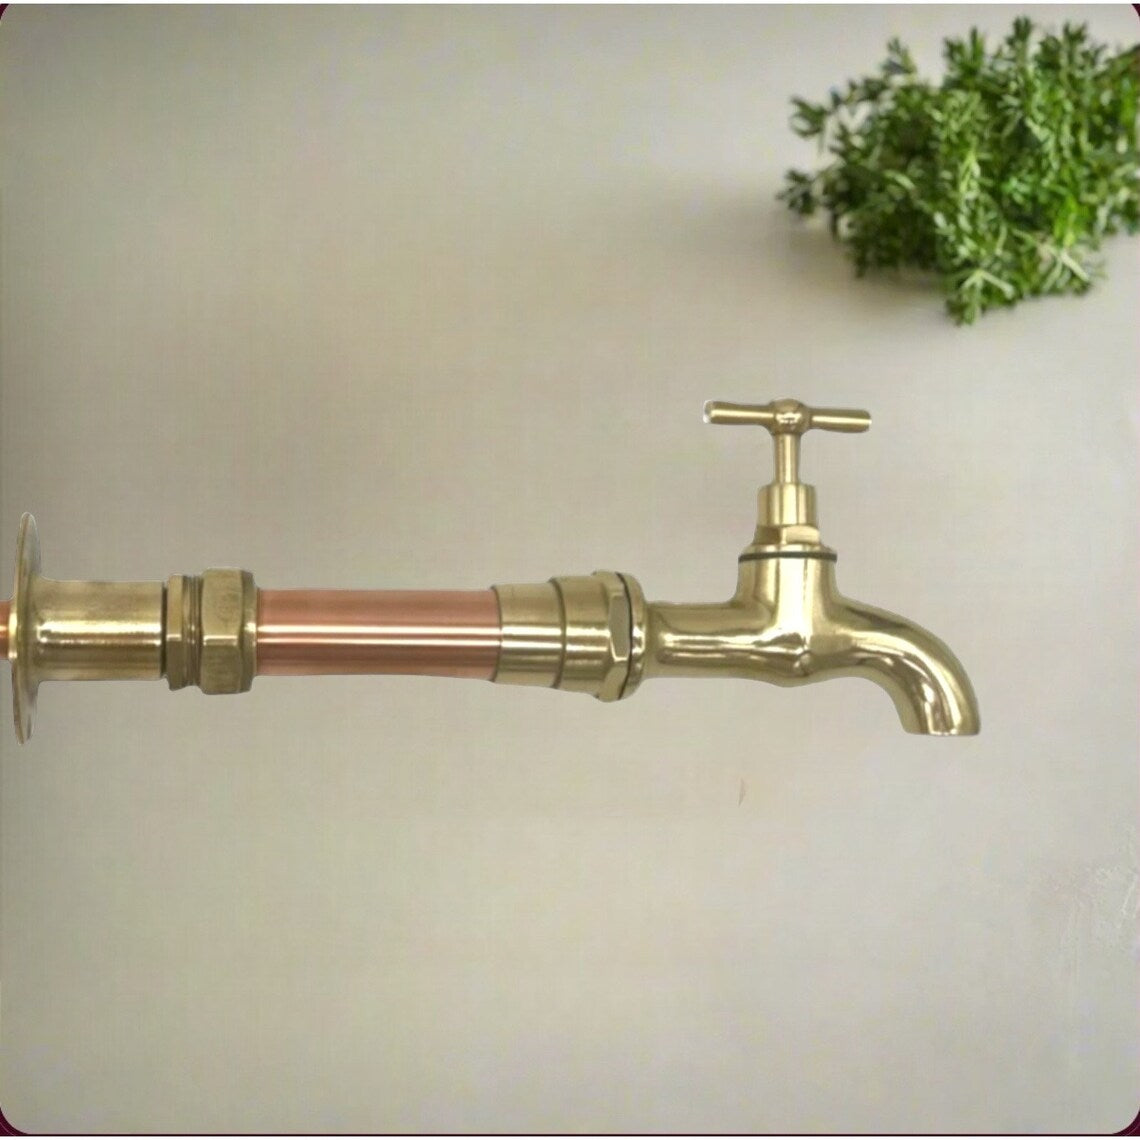 Handmade copper and brass wall mounted tap